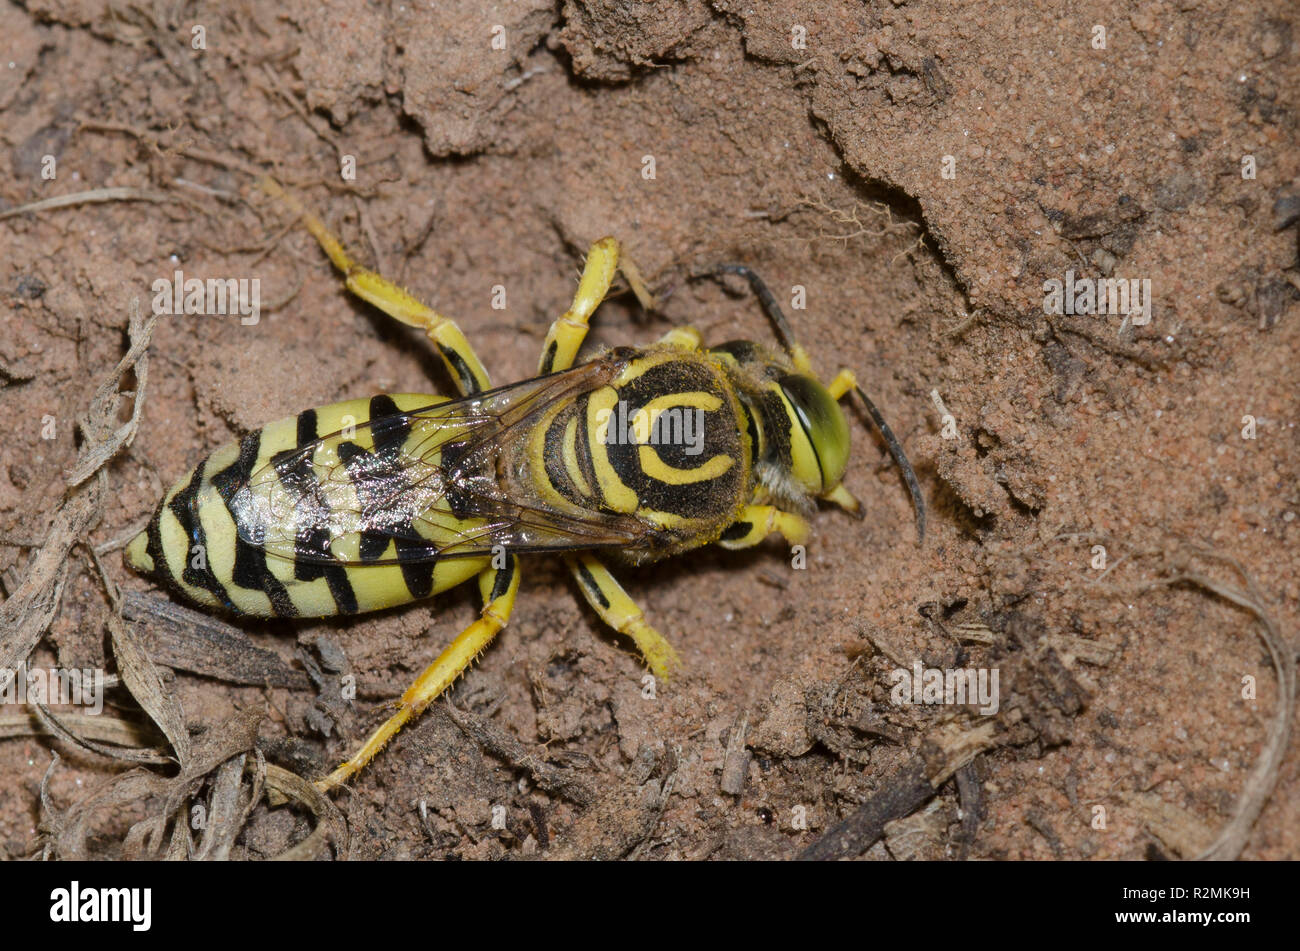 Sand Wasp, Subtribe Stictiellina, digging in soil Stock Photo